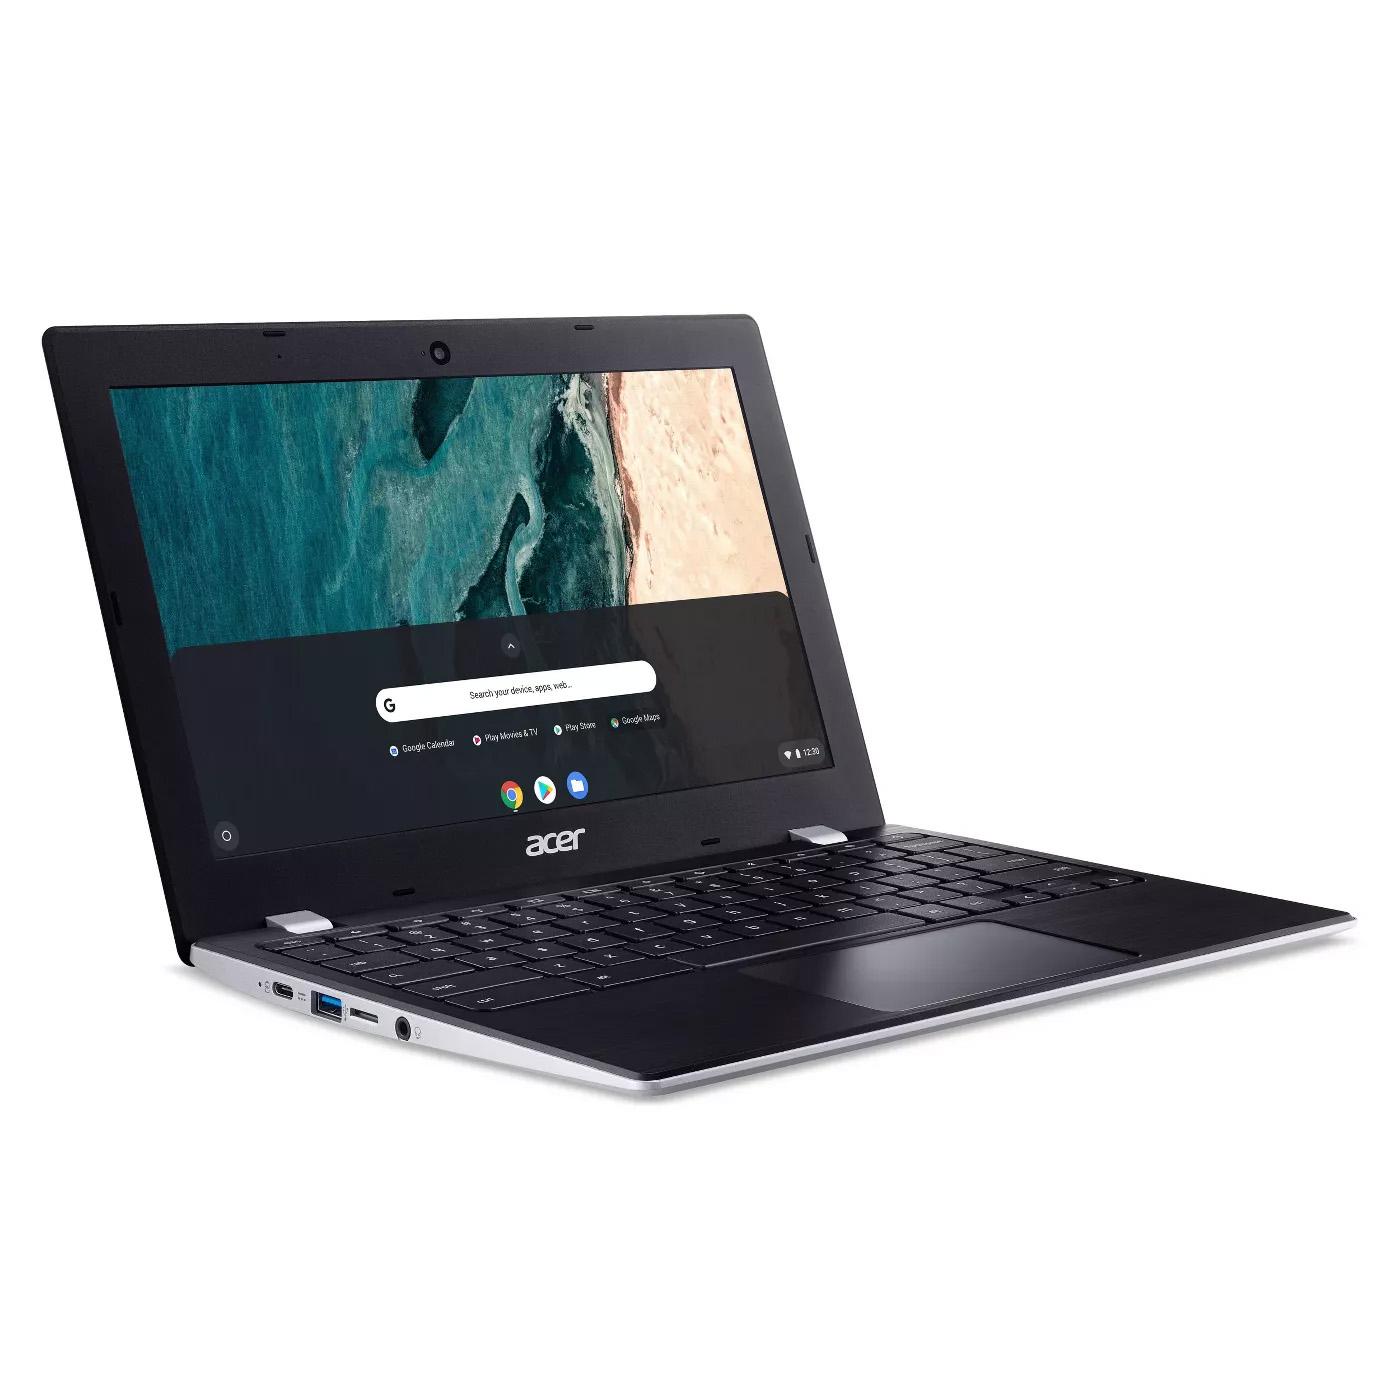 Acer 11.6in Chromebook 311 Laptop for $149.99 Shipped